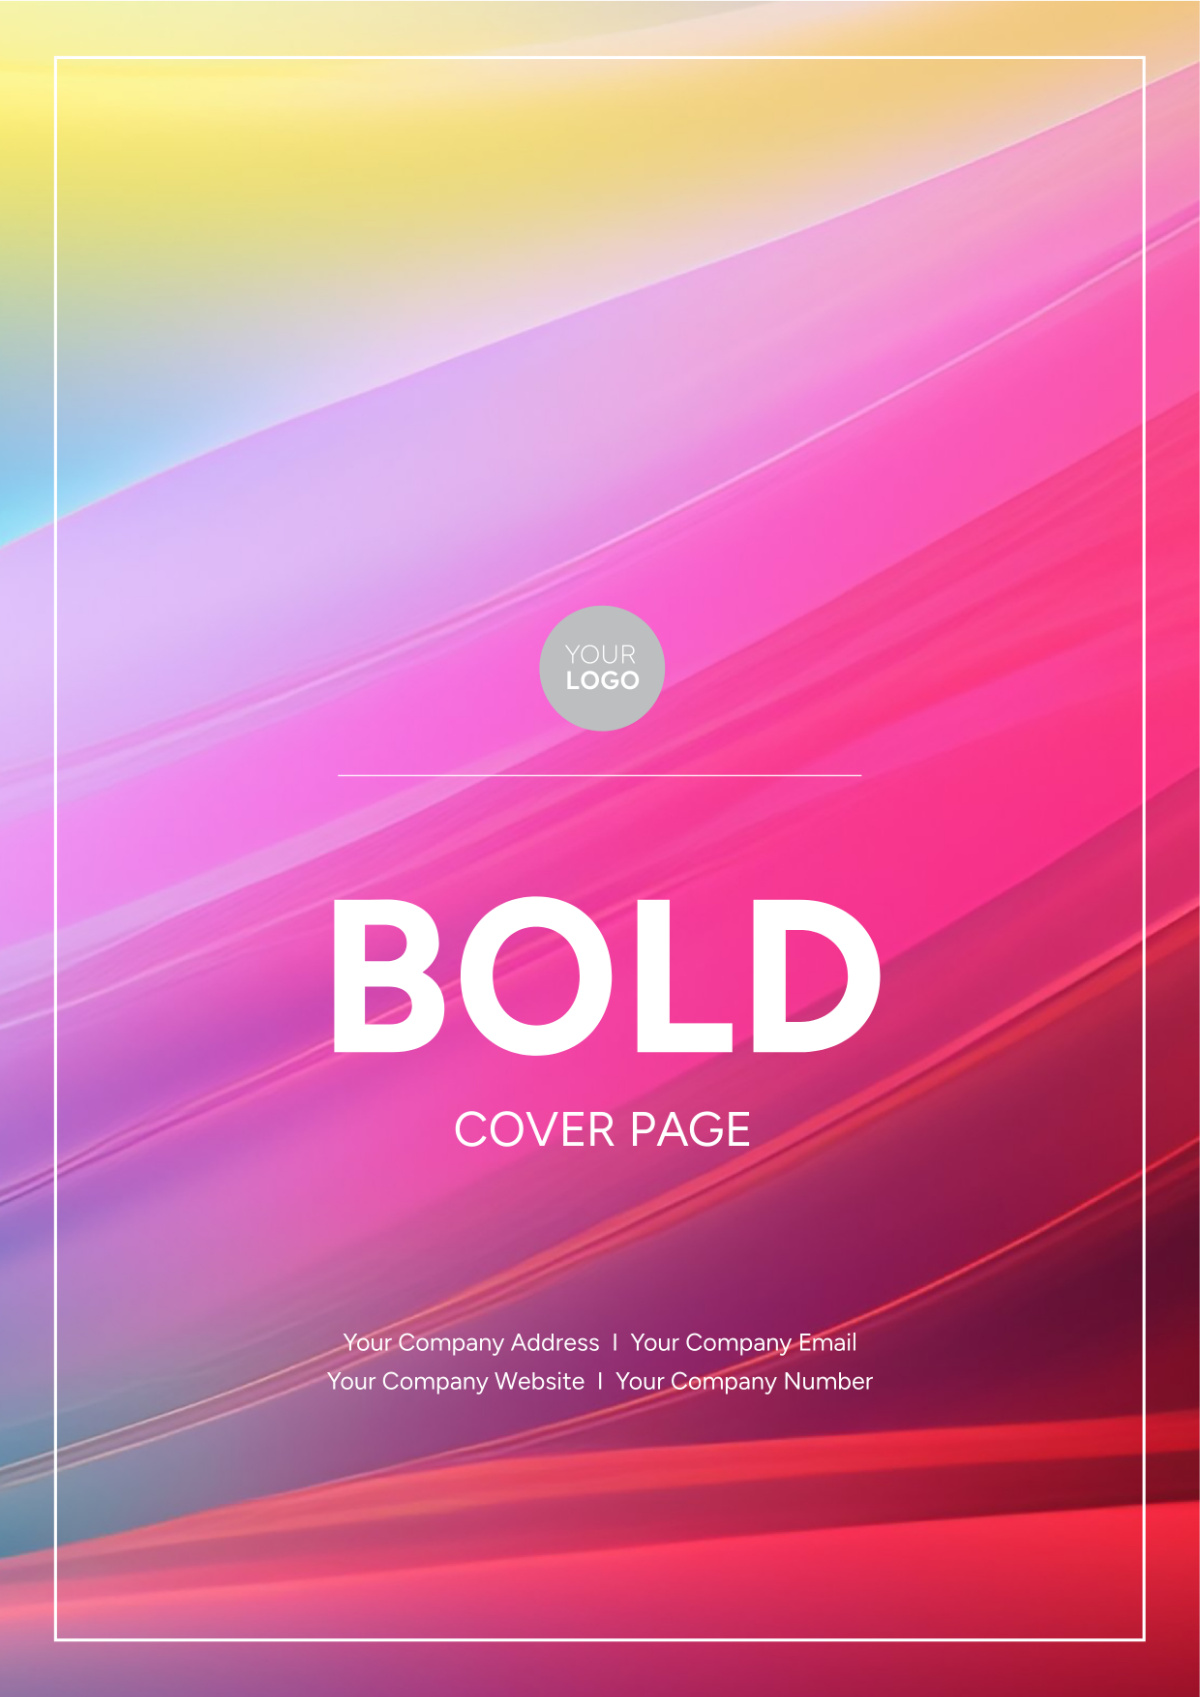 Bold Half Title Cover Page